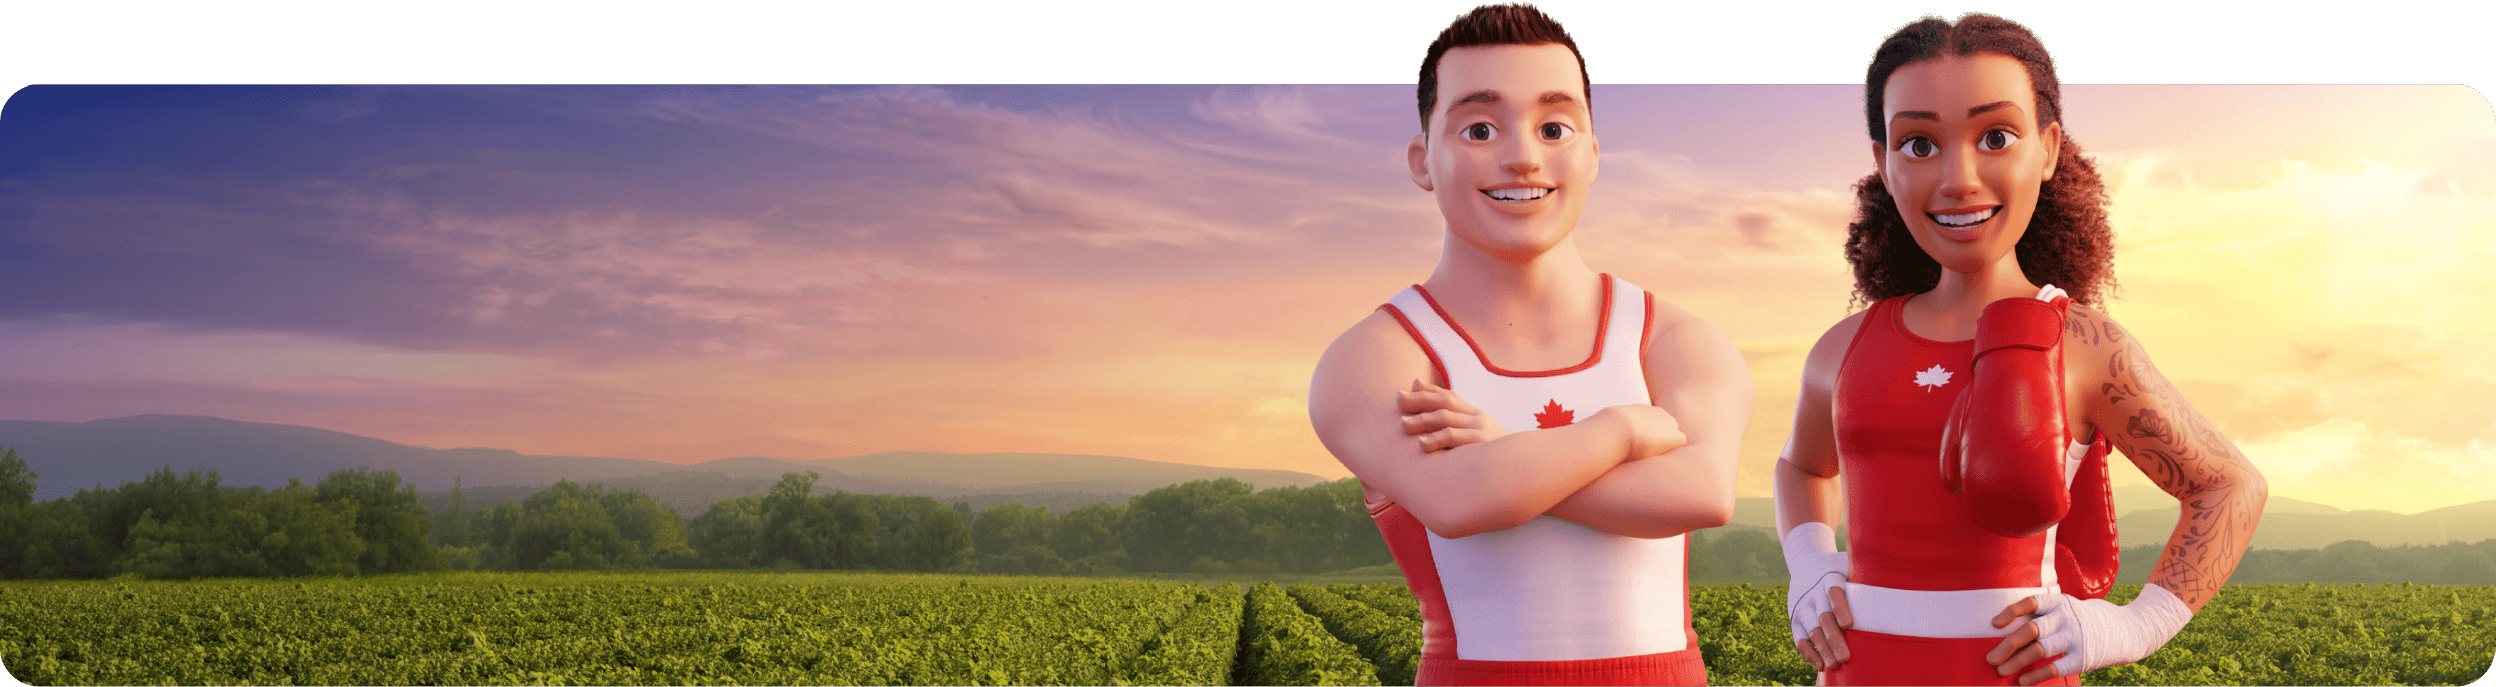 CGI image of two Olympic athletes in Canadian colours, a woman and a man, standing in a farmer’s field at sunset.